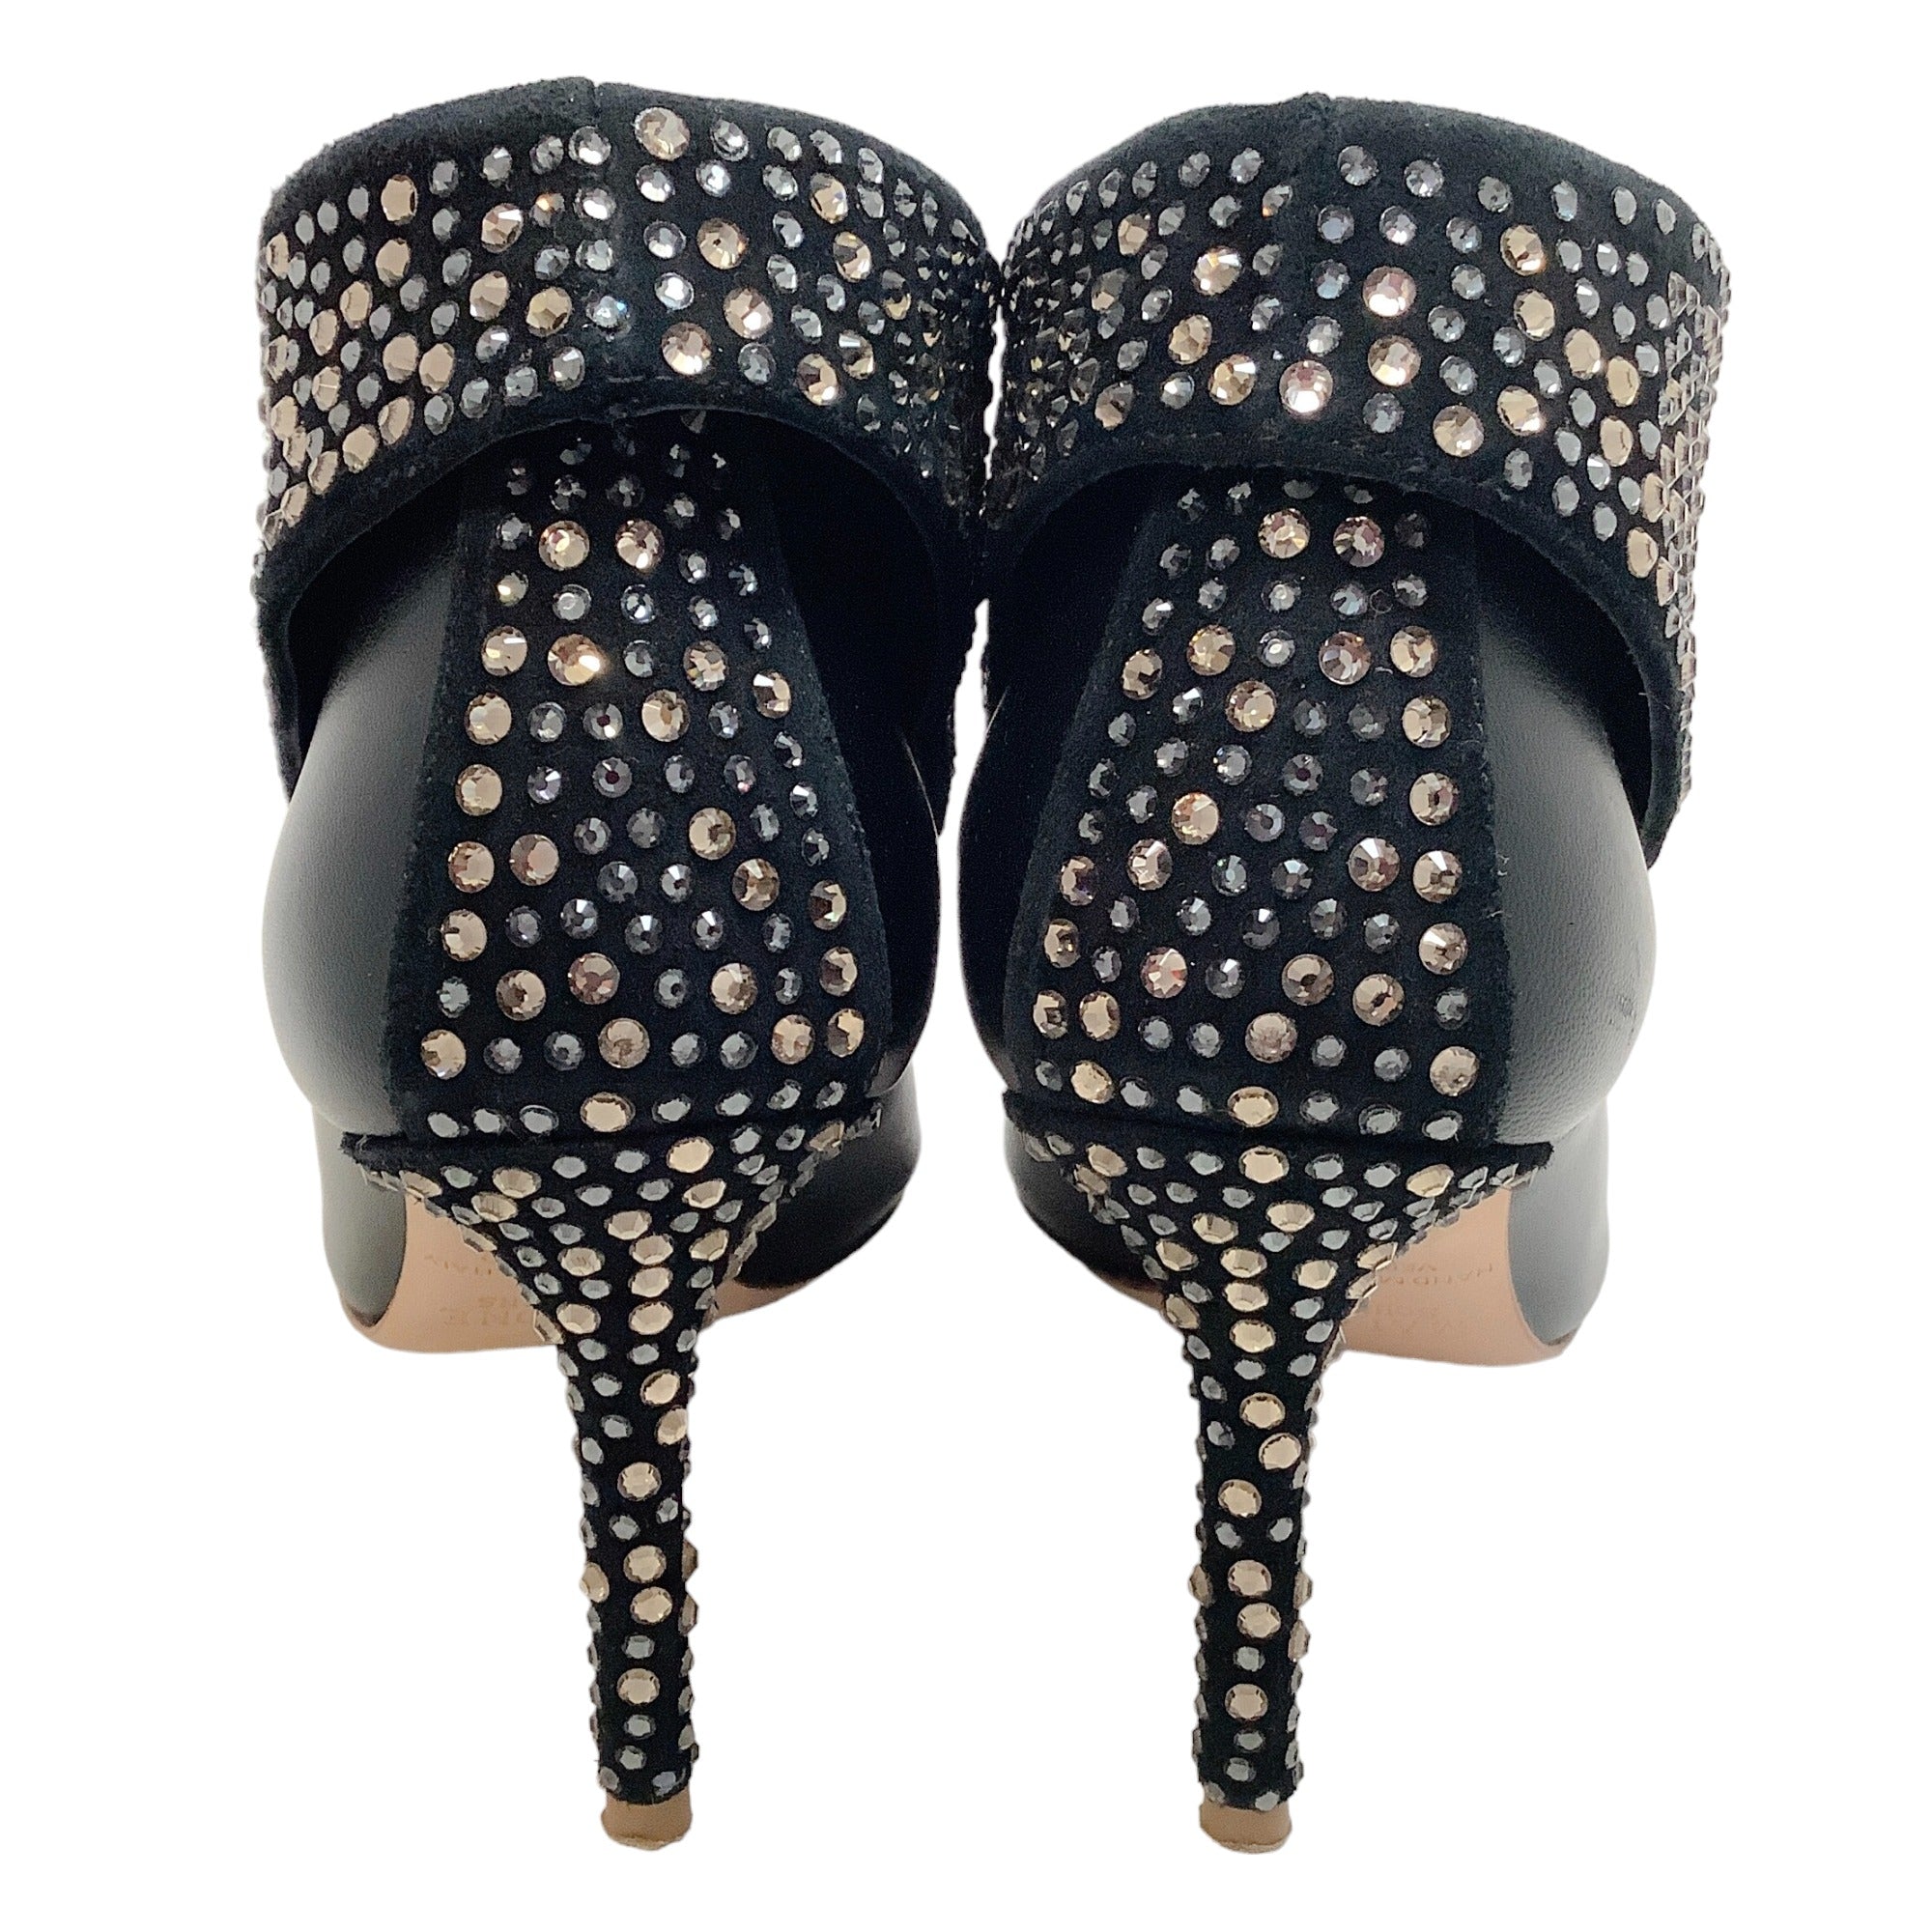 Malone Souliers Black Fold Over Booties with Crystal Embellishments